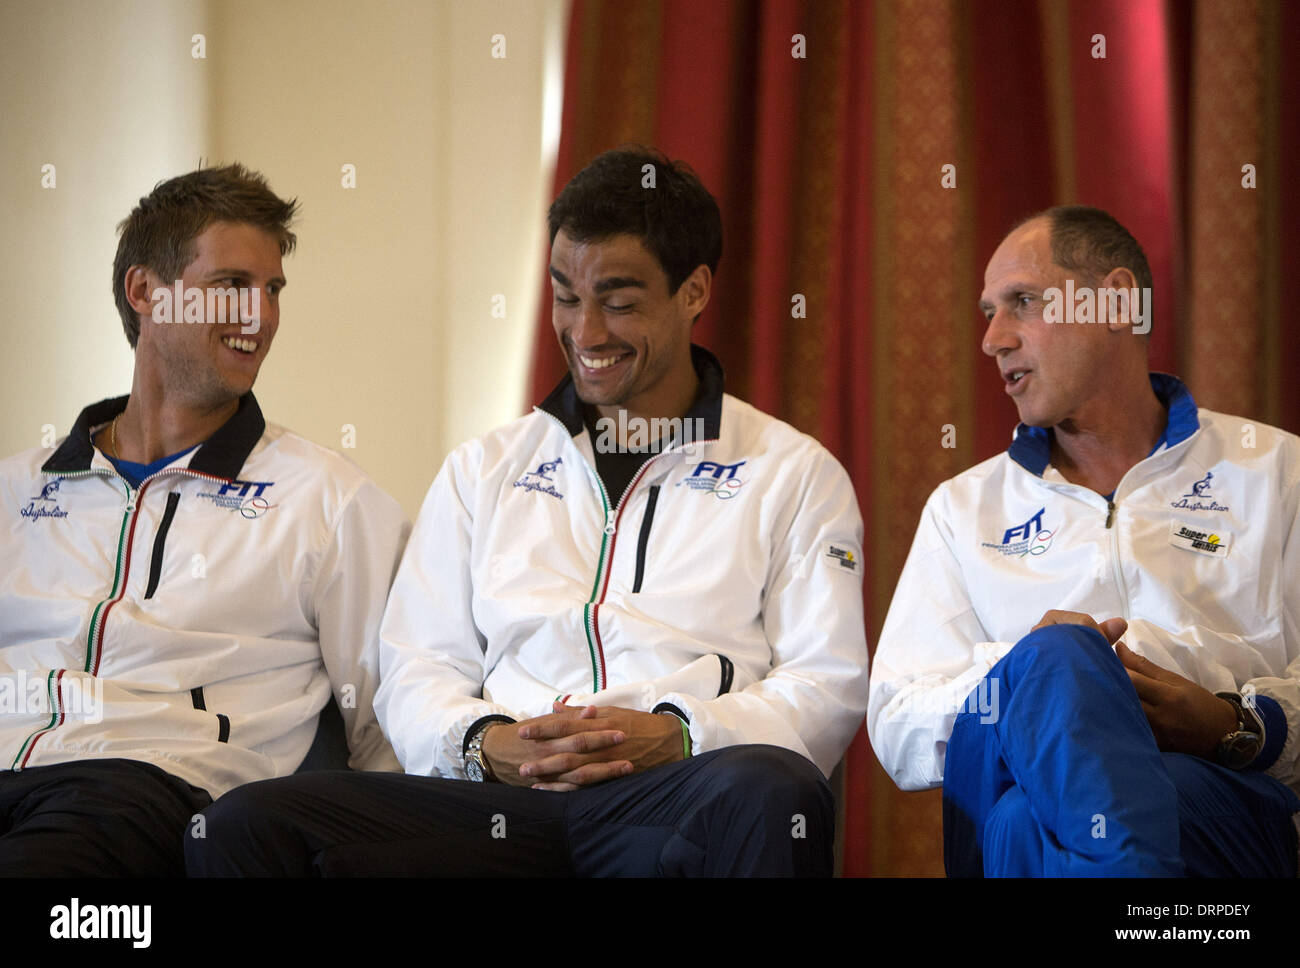 Mar Del Plata, Argentina. 30th Jan, 2014. Captain of Italy's Davis Cup team, Corrado Barazzutti (R), reacts along with players Fabio Fognini (C) and Andreas Seppi (L), during the drawing for the game matches of the first round of the Davis Cup World Group 2014 between Argentina and Italy, in Mar del Plata, 404 km from Buenos Aires, capital of Argentina, on Jan. 30, 2014. Argentina and Italy will face each other in the first round of the Davis Cup World Group at Patinodromo Municipal Adalberto Lugea in Mar del Plata, from Jan. 31 to Feb. 2. Credit:  Martin Zabala/Xinhua/Alamy Live News Stock Photo